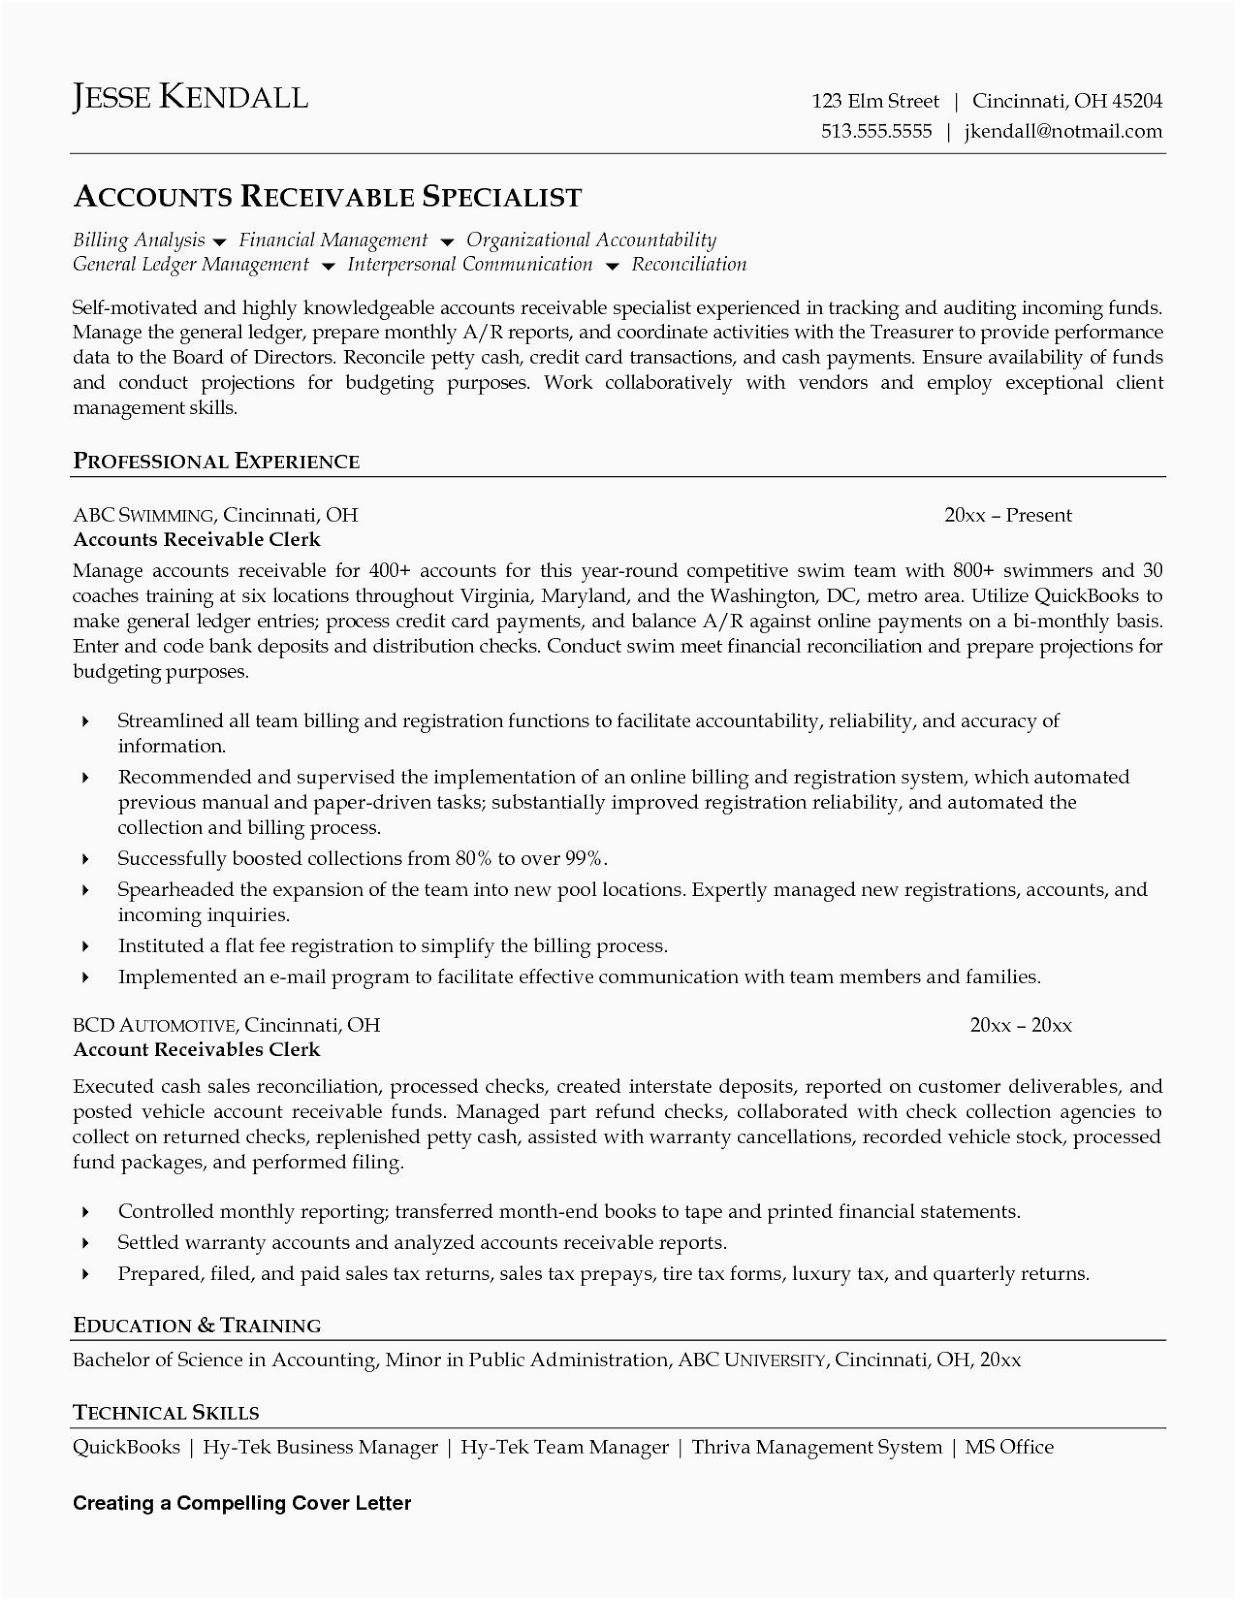 Sample Resume for Accounting Clerk with No Experience Account Clerk Resume Account Clerk Resume Sample Account